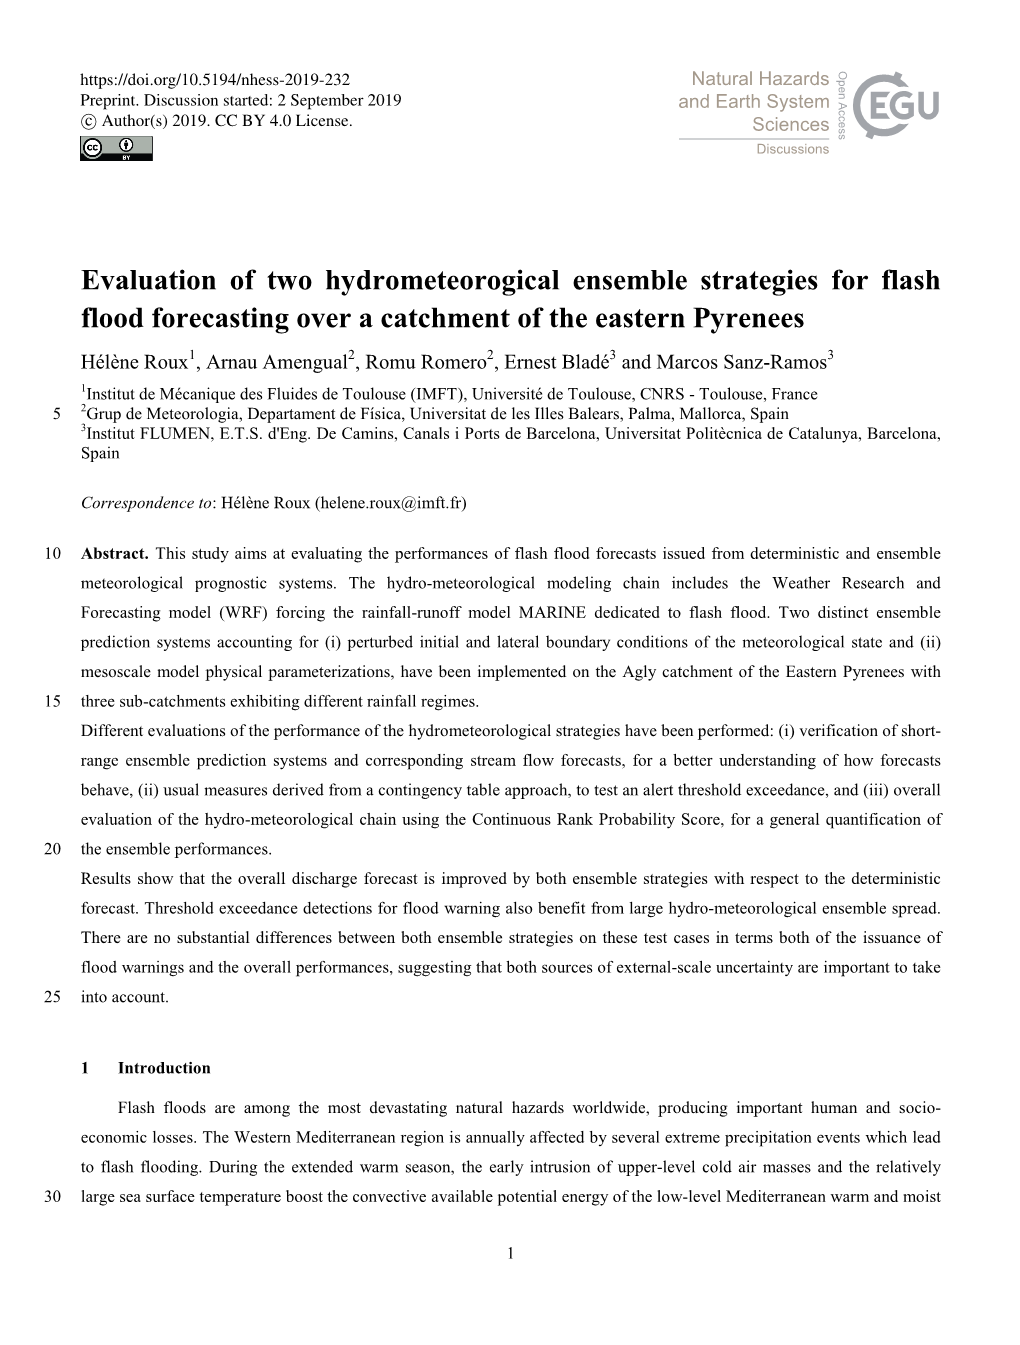 Evaluation of Two Hydrometeorogical Ensemble Strategies for Flash Flood